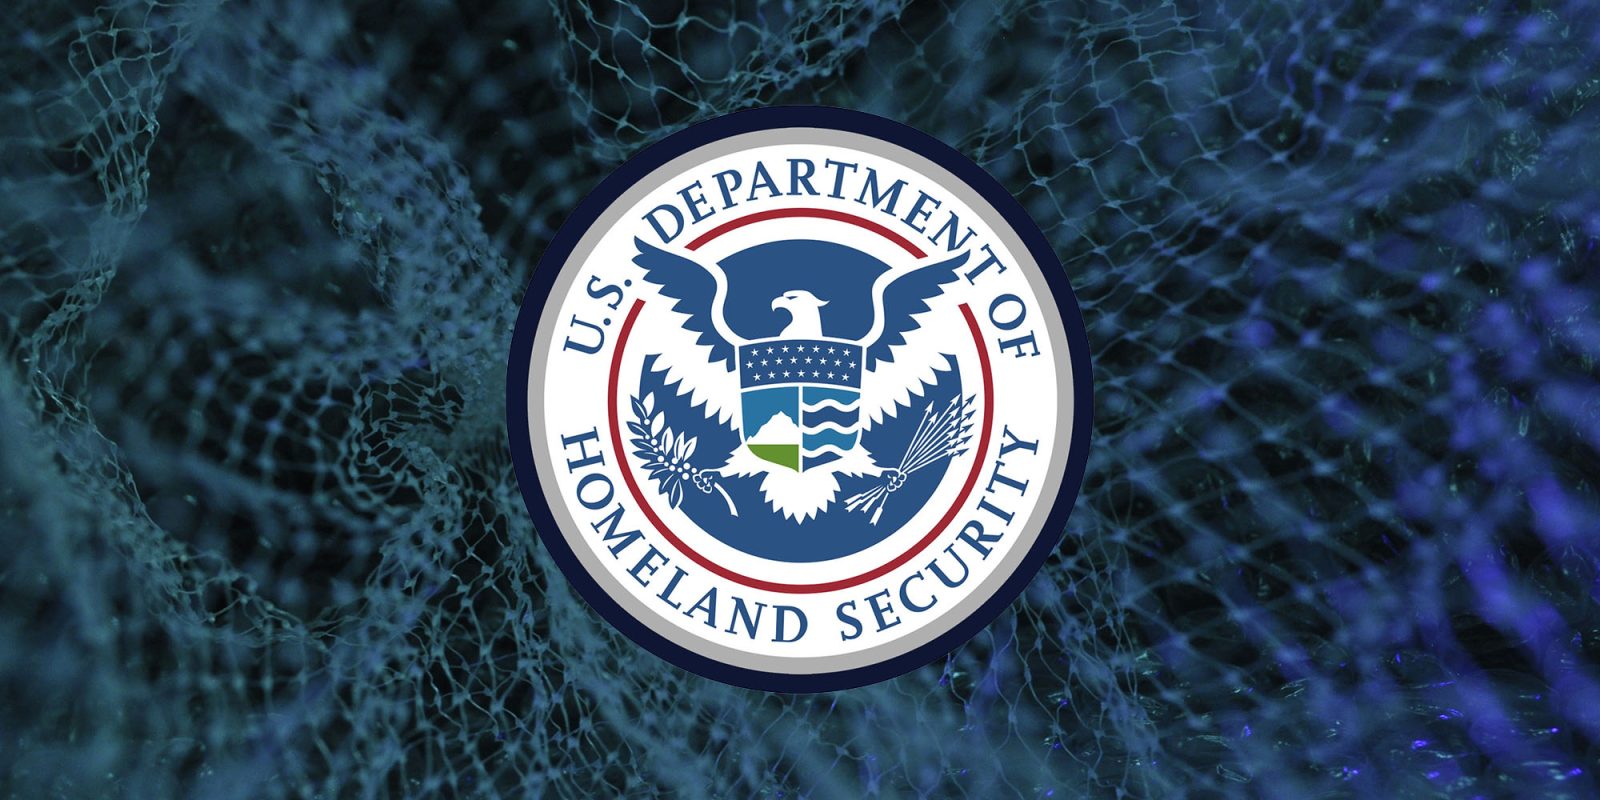 AT&T outage DHS and FBI investigating | DHS logo over mesh image